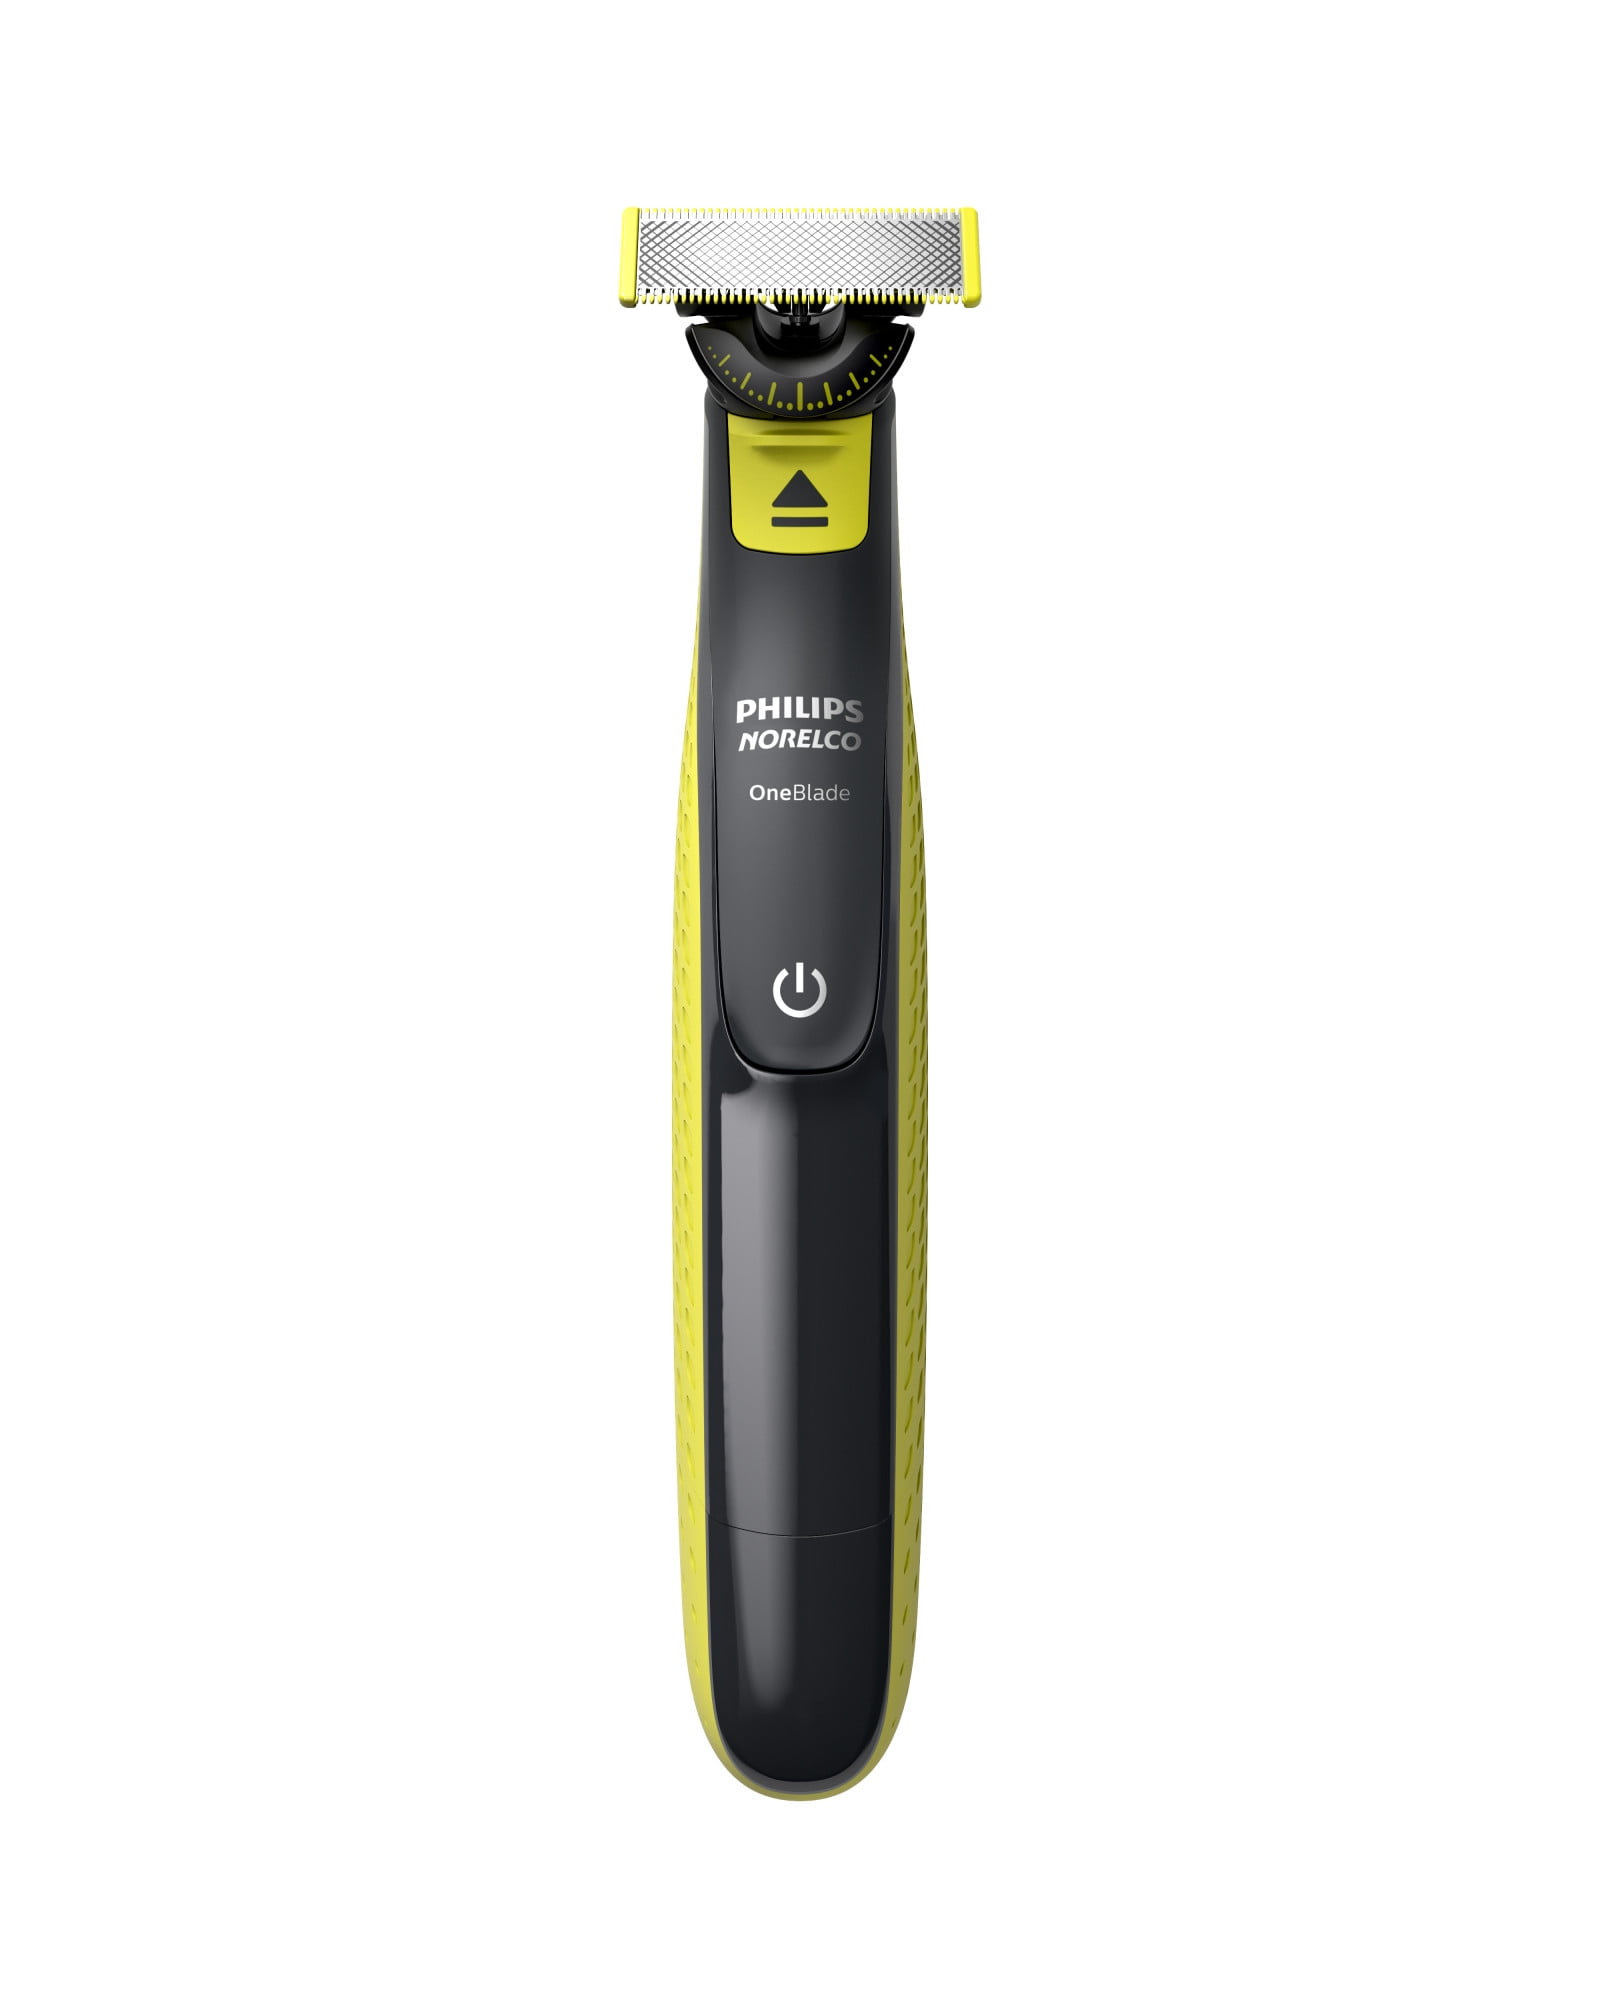 Philips Norelco OneBlade 360 Face, Electric Razor and Beard